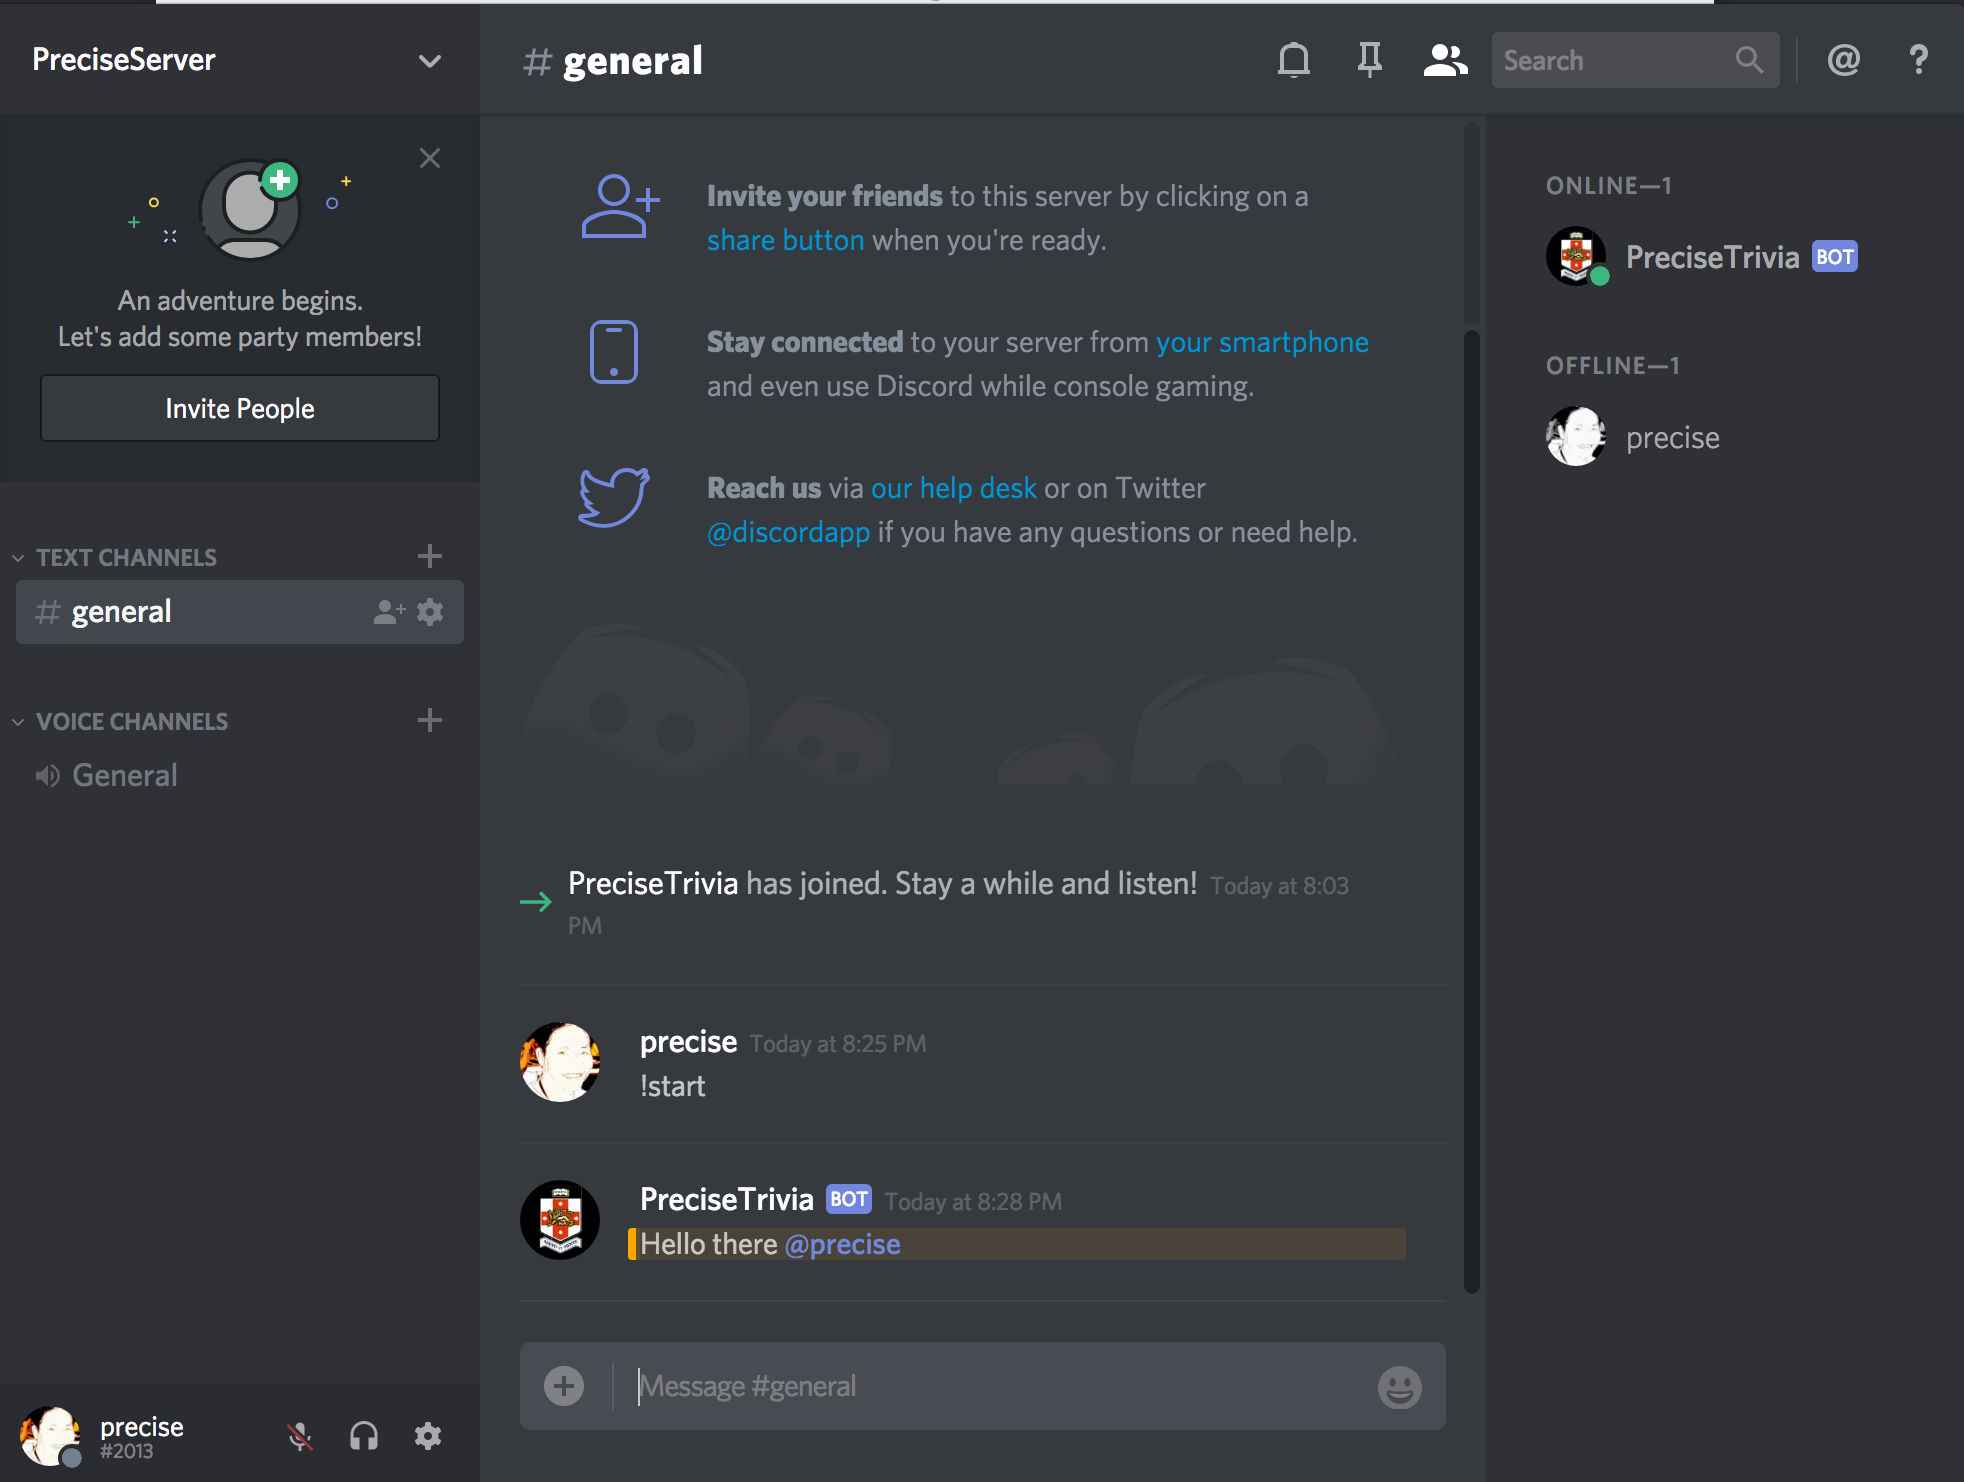 Build a Discord Bot with Friends using Autocode 